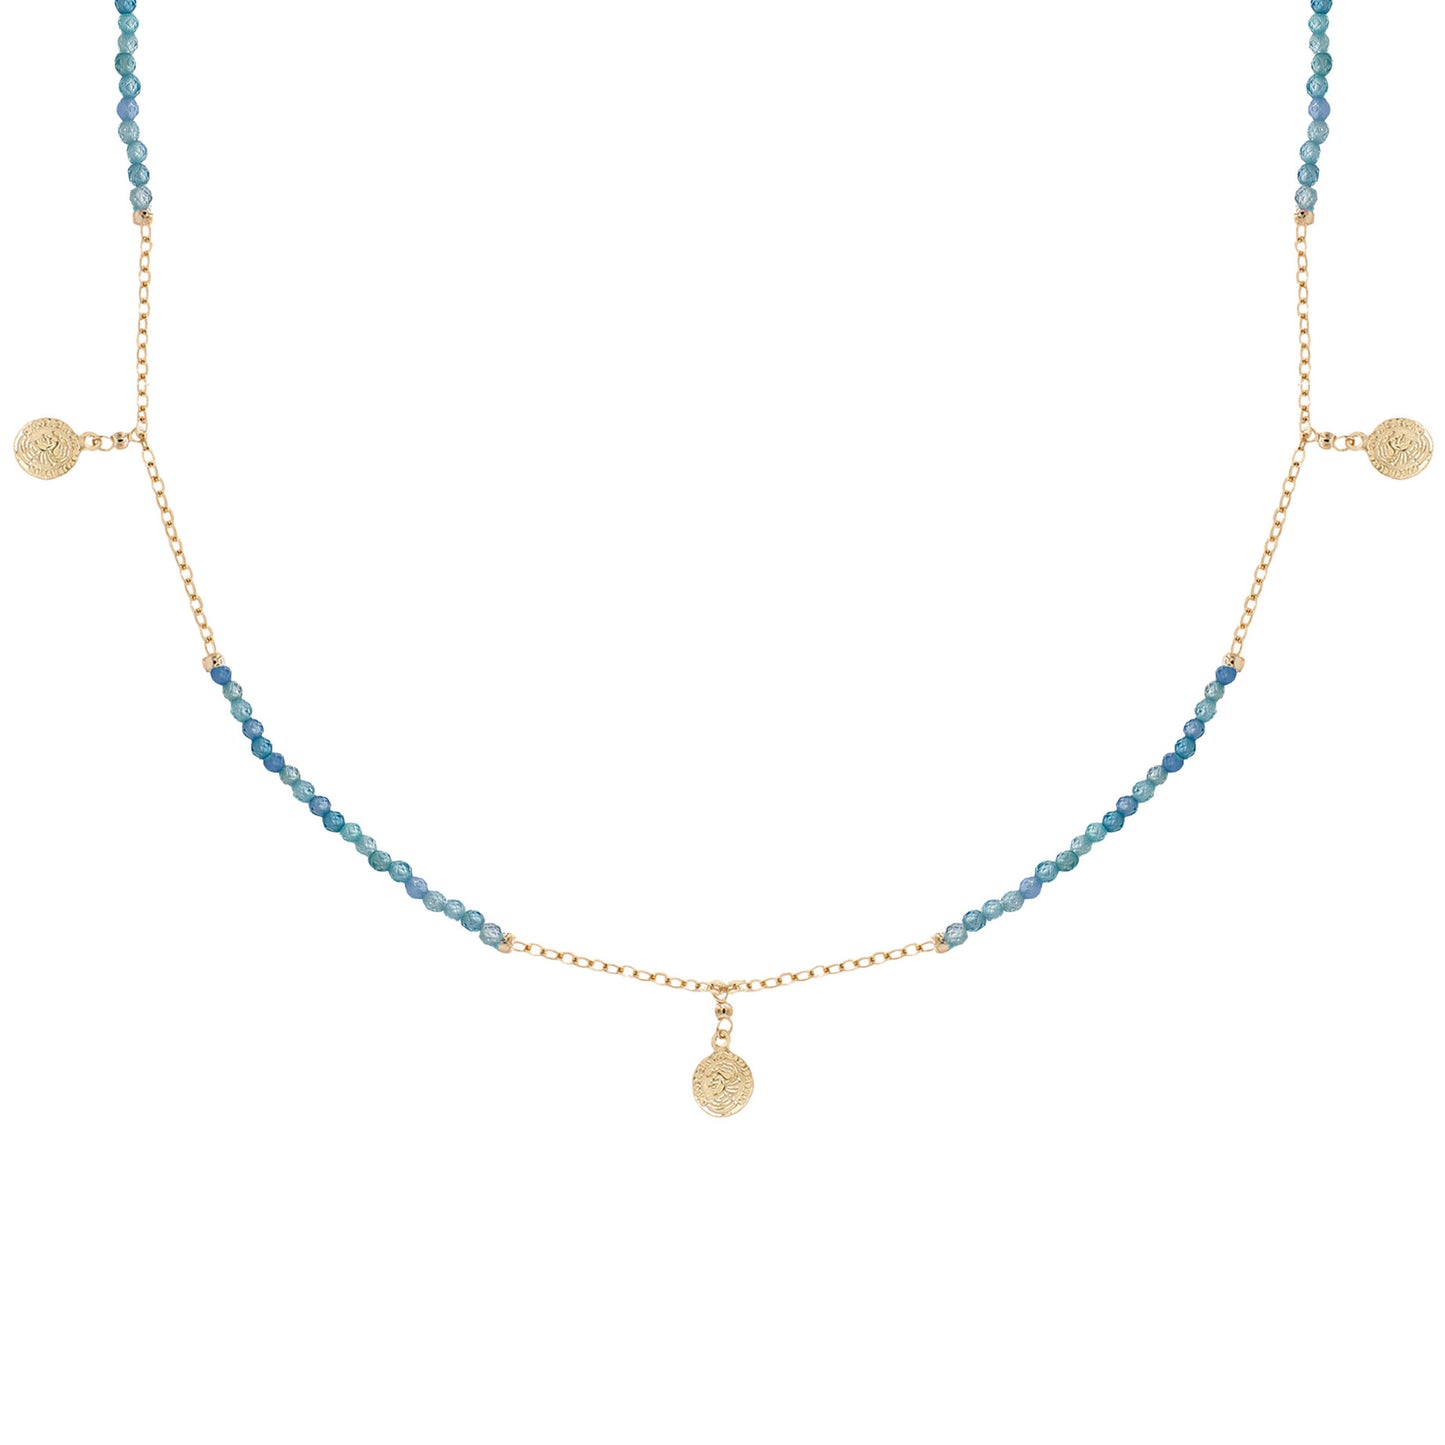 Adelie Necklace